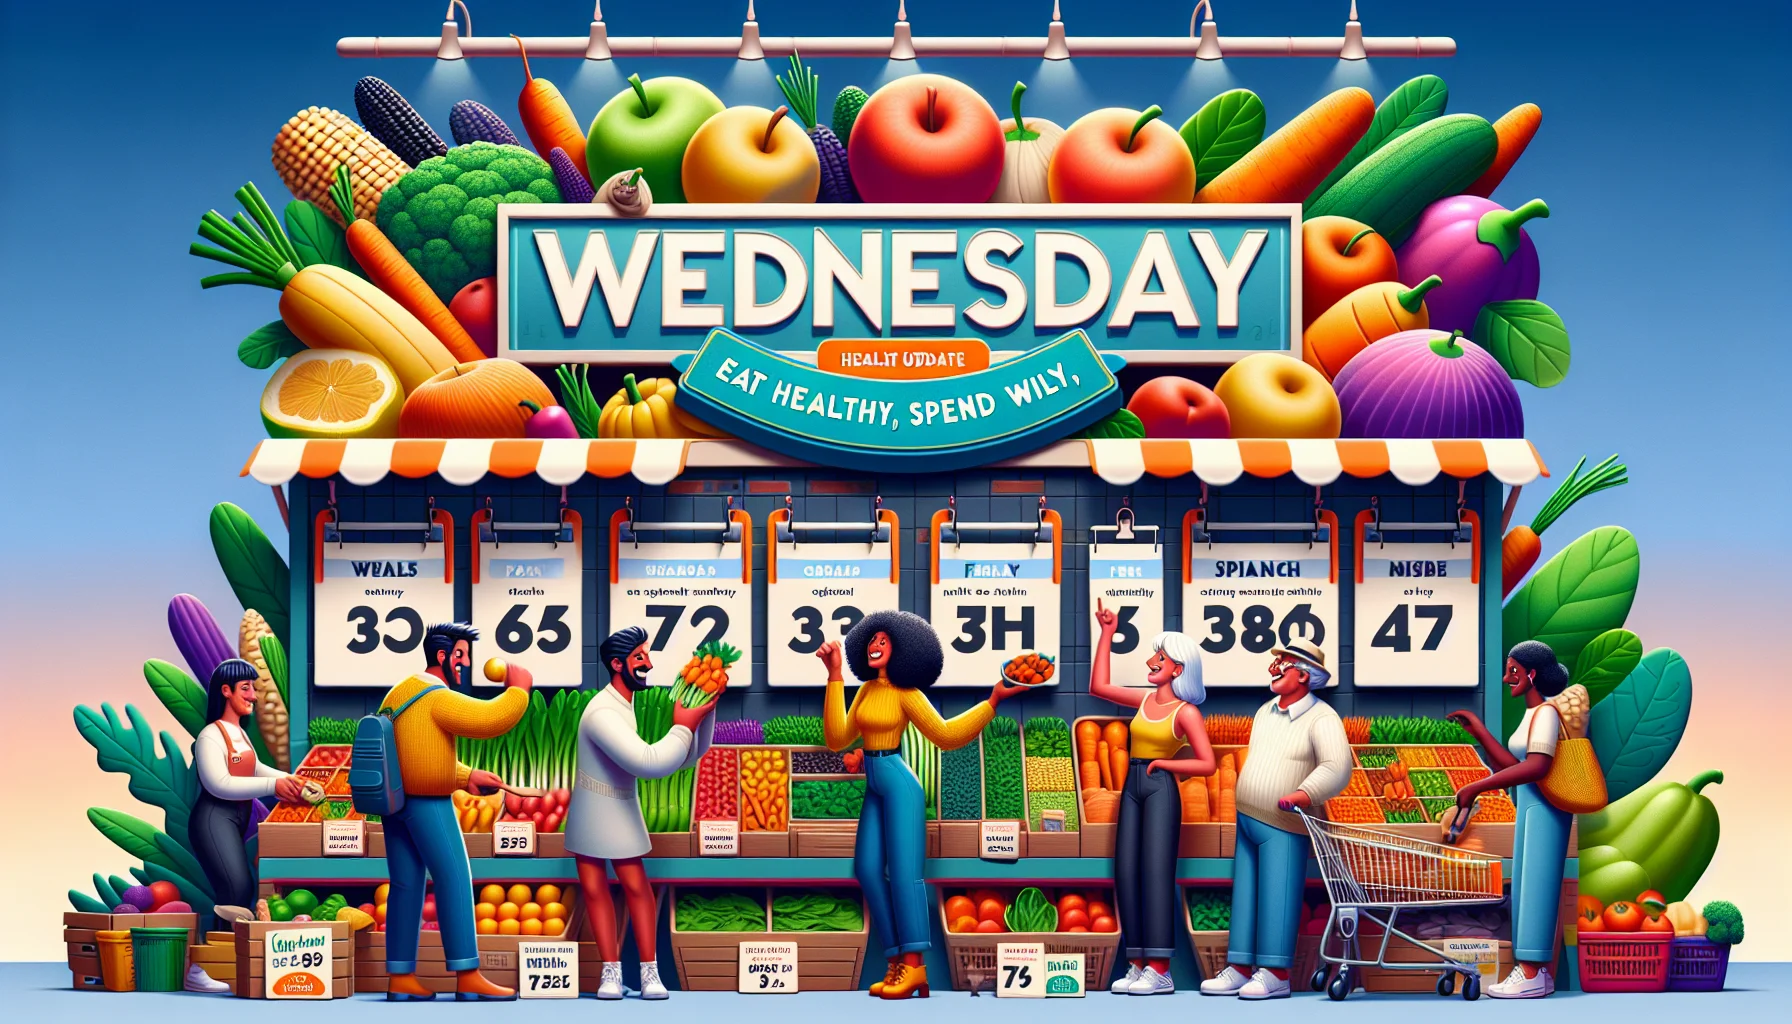 Generate a lively and colorful image of a playful scene unfolding on a Wednesday. We see a large, stylish calendar on the wall prominently displaying the date. Beside it, a vibrant fruit and vegetable market is set up, overflowing with nutritious options such as apples, carrots, spinach, and more. Characters with diverse appearances, including a middle-aged Caucasian man, a young Hispanic woman, an elderly Asian woman, and a dashing Black teenager, are seen selecting their choices gleefully as prices visibly marked are surprisingly low. A light-hearted tagline in bold letters at the top reads 'Eat Healthy, Spend Wisely, Feel Fantastic - Health Update Wednesday'.